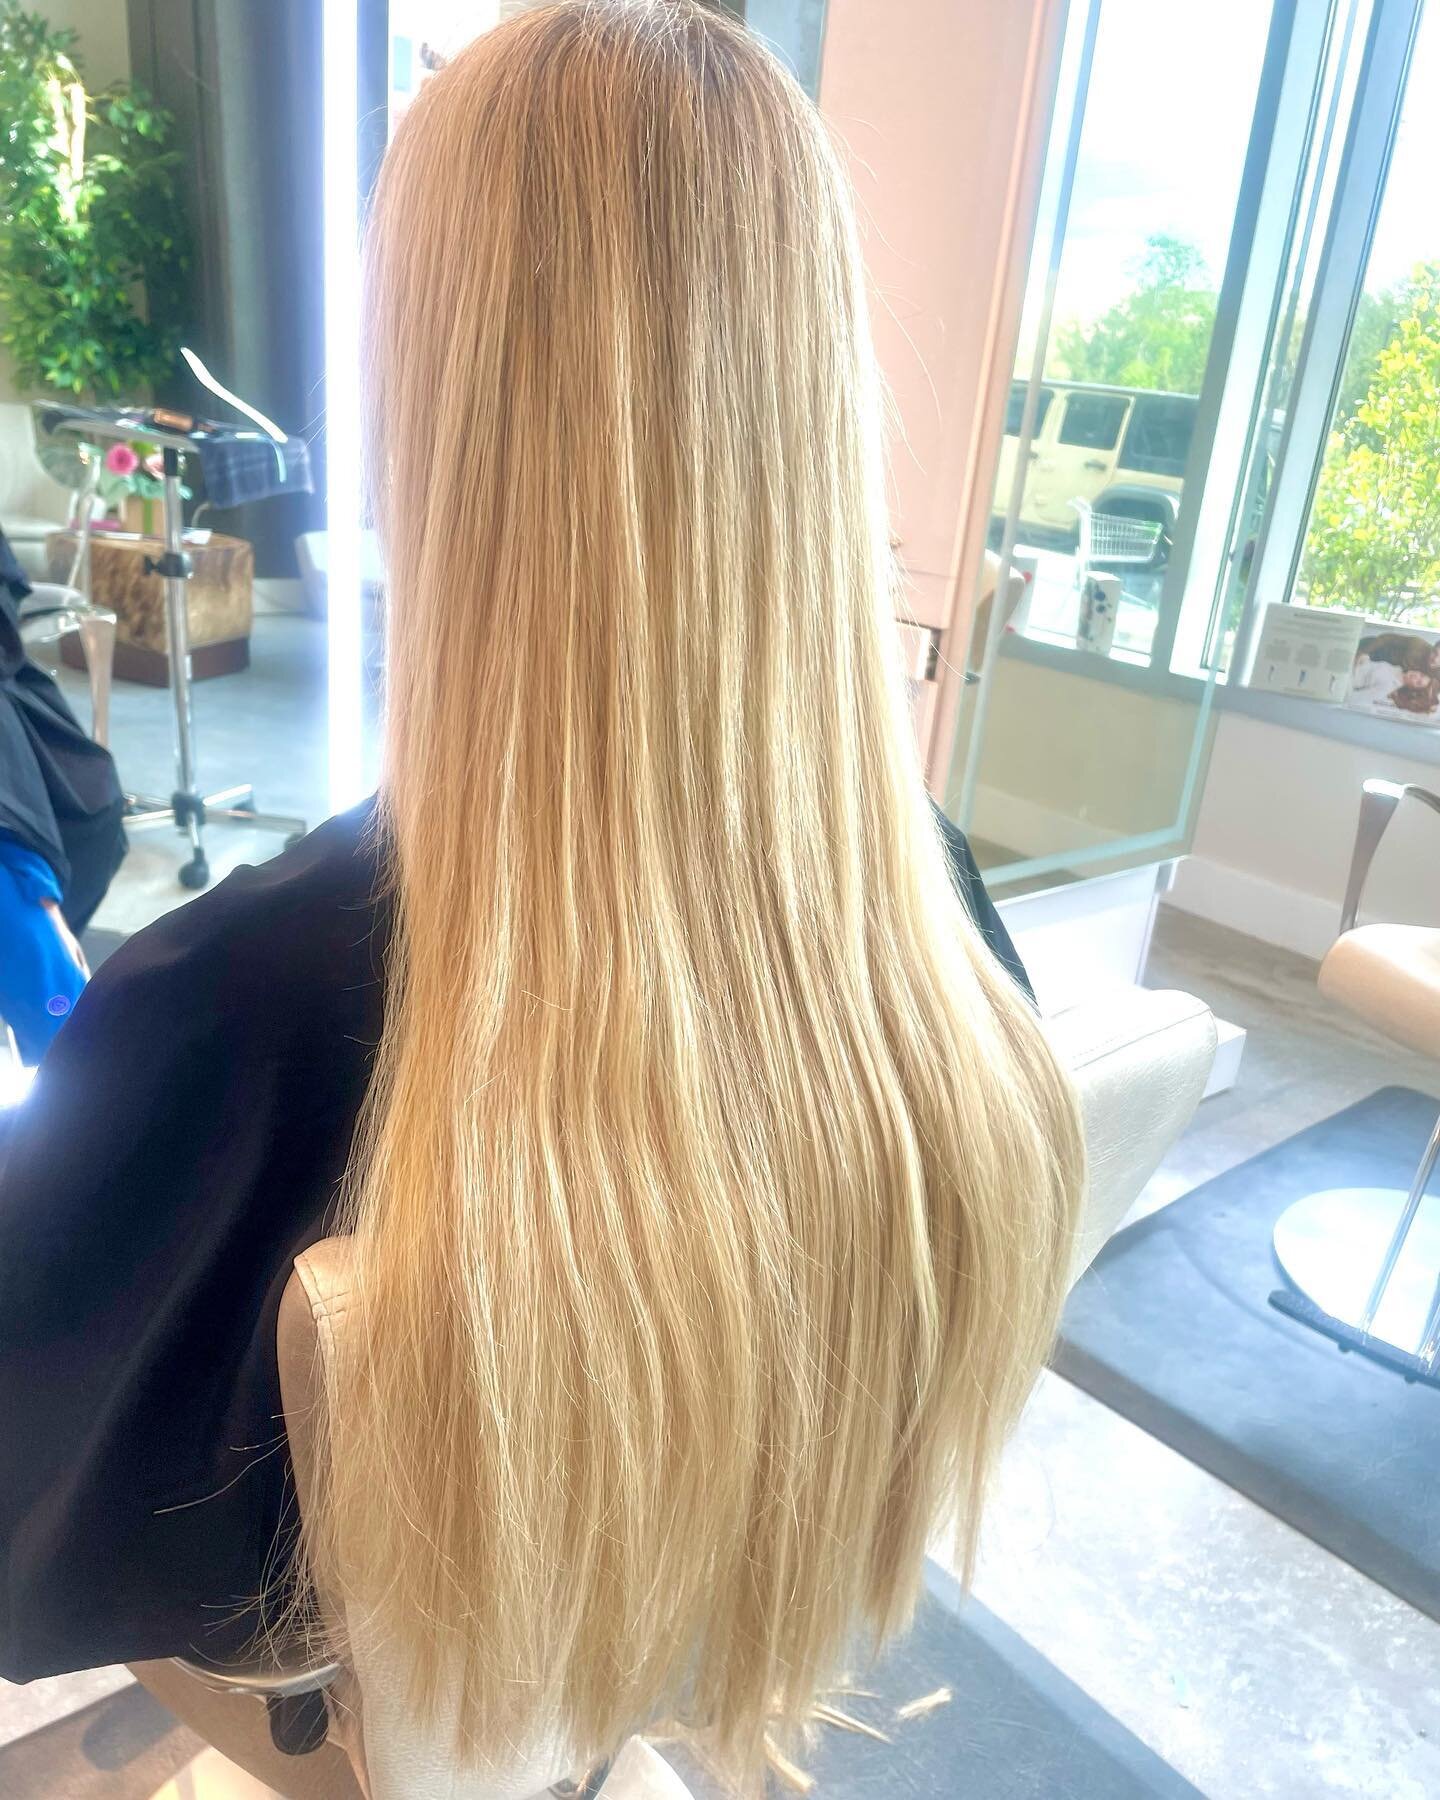 Rapunzel, Rapunzel
Let down your hair!
Give me some extensions with a little flare! 👑
&bull; hair by @emakeupbeauty 

&bull;BOOK YOUR APPOINTMENT TODAY&bull;
www.thepurehairartistry.com
843-871-3898
&amp; @sharzhair @sarahsarezkyhair @courtney_cosme